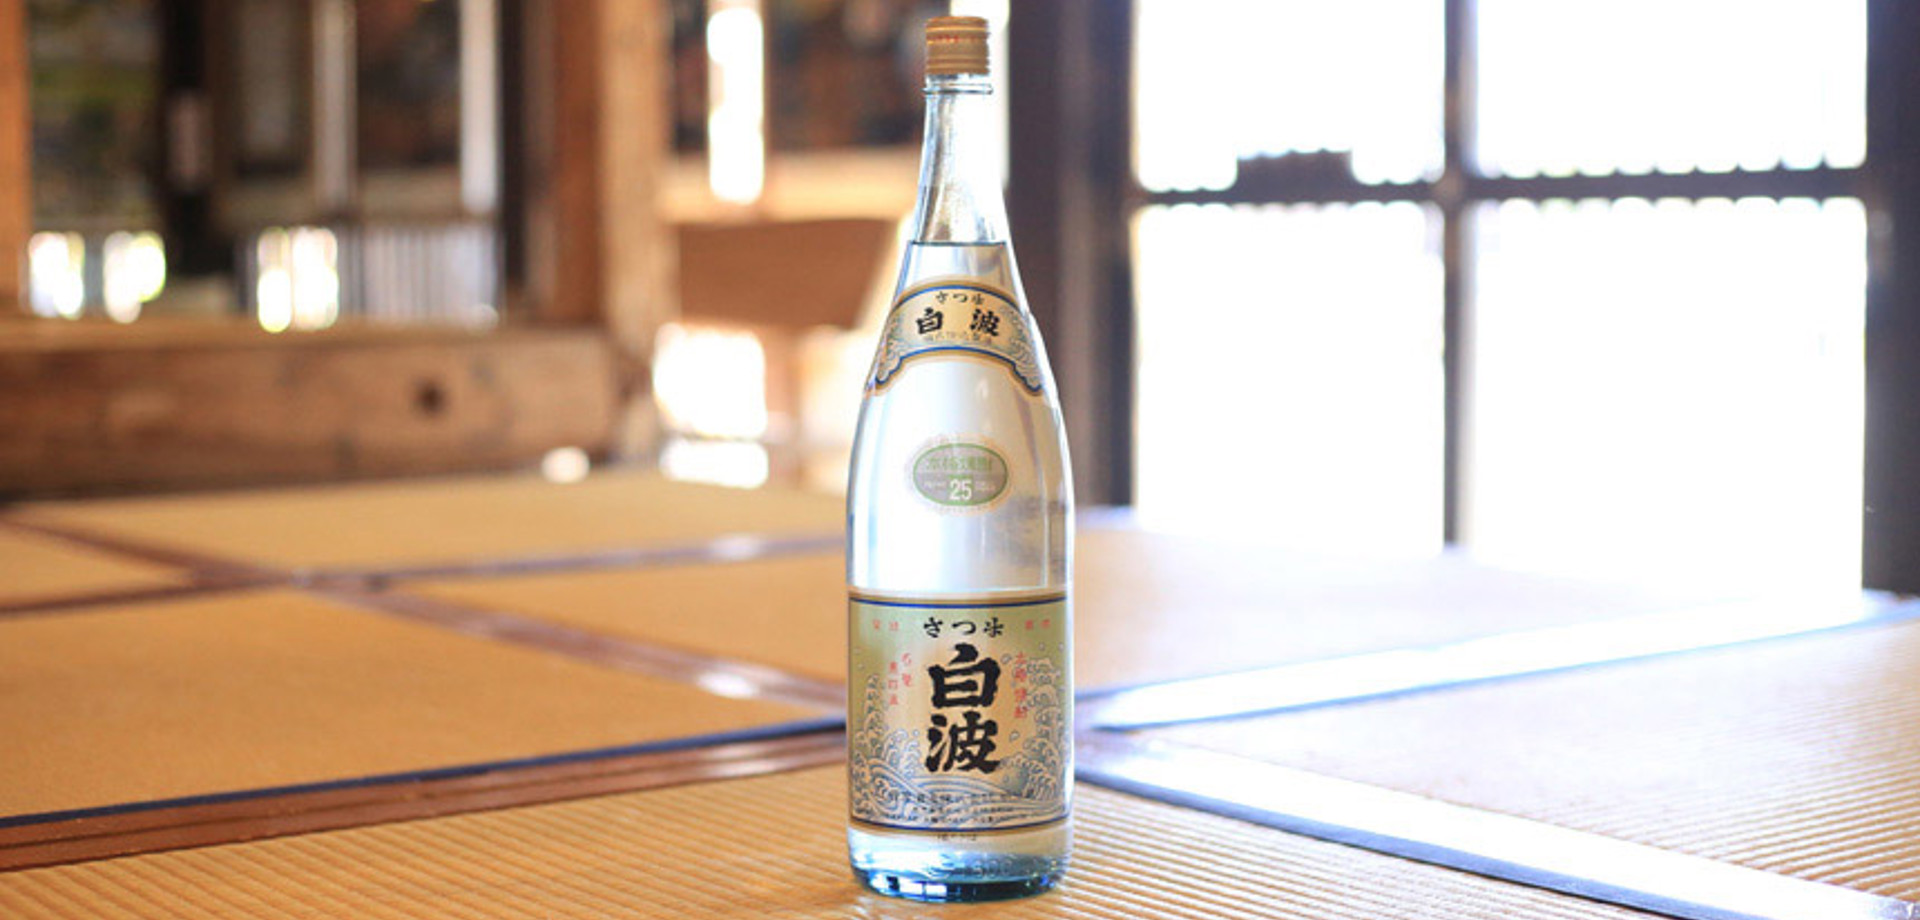 In the middle of a large table there is a bottle of shochu with labels written in japanese